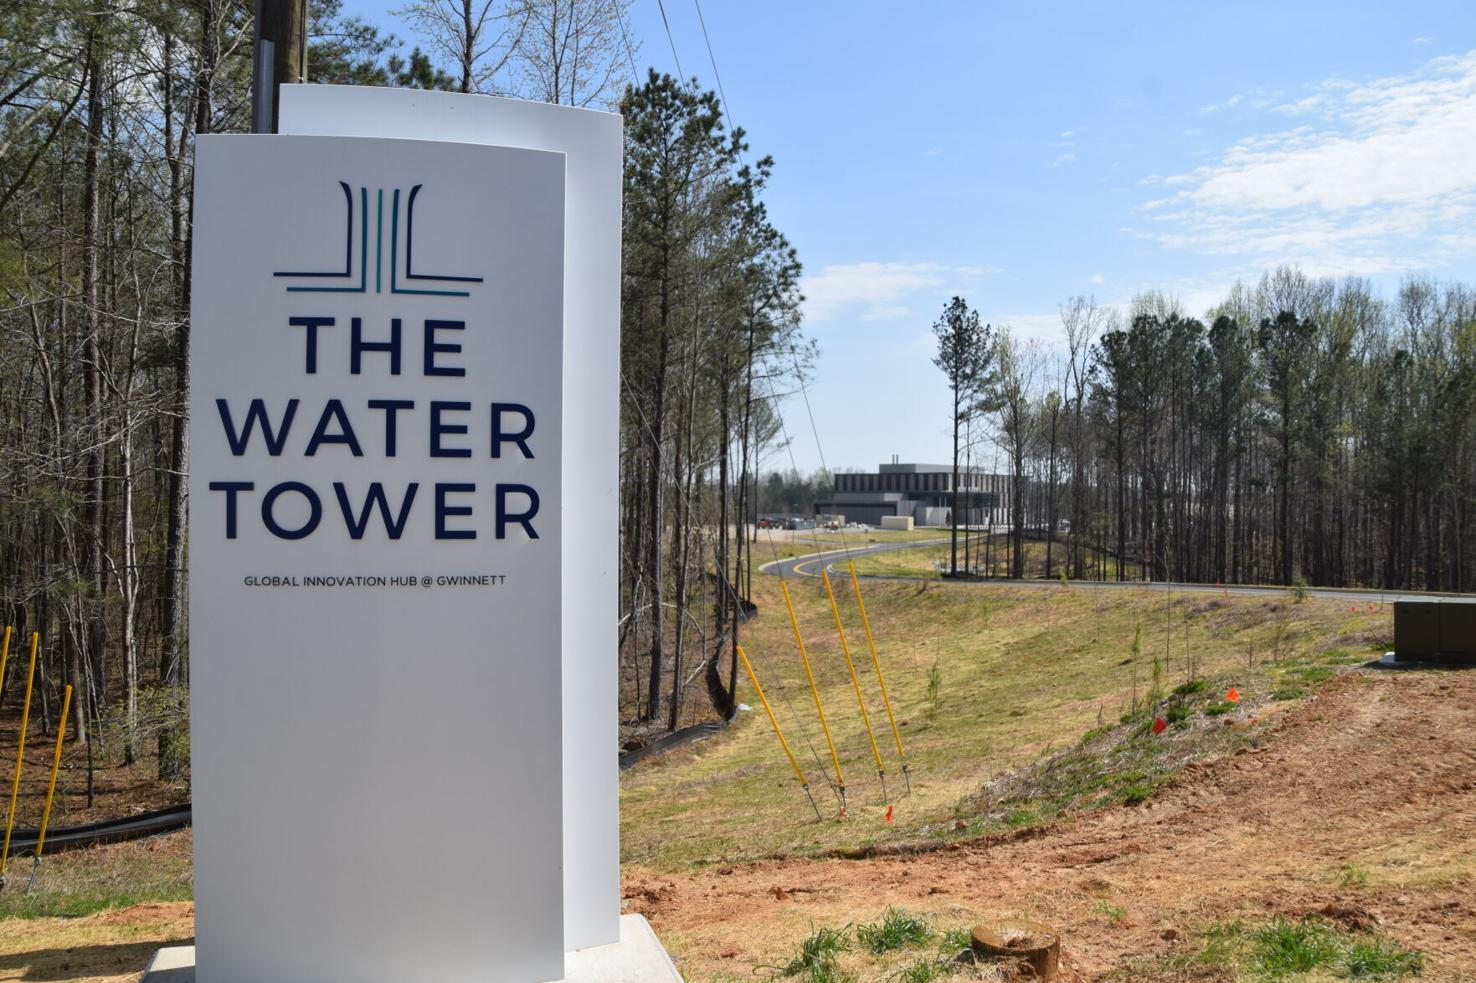 The Water Tower's ribbon cutting opens door for Gwinnett to become a major research destination